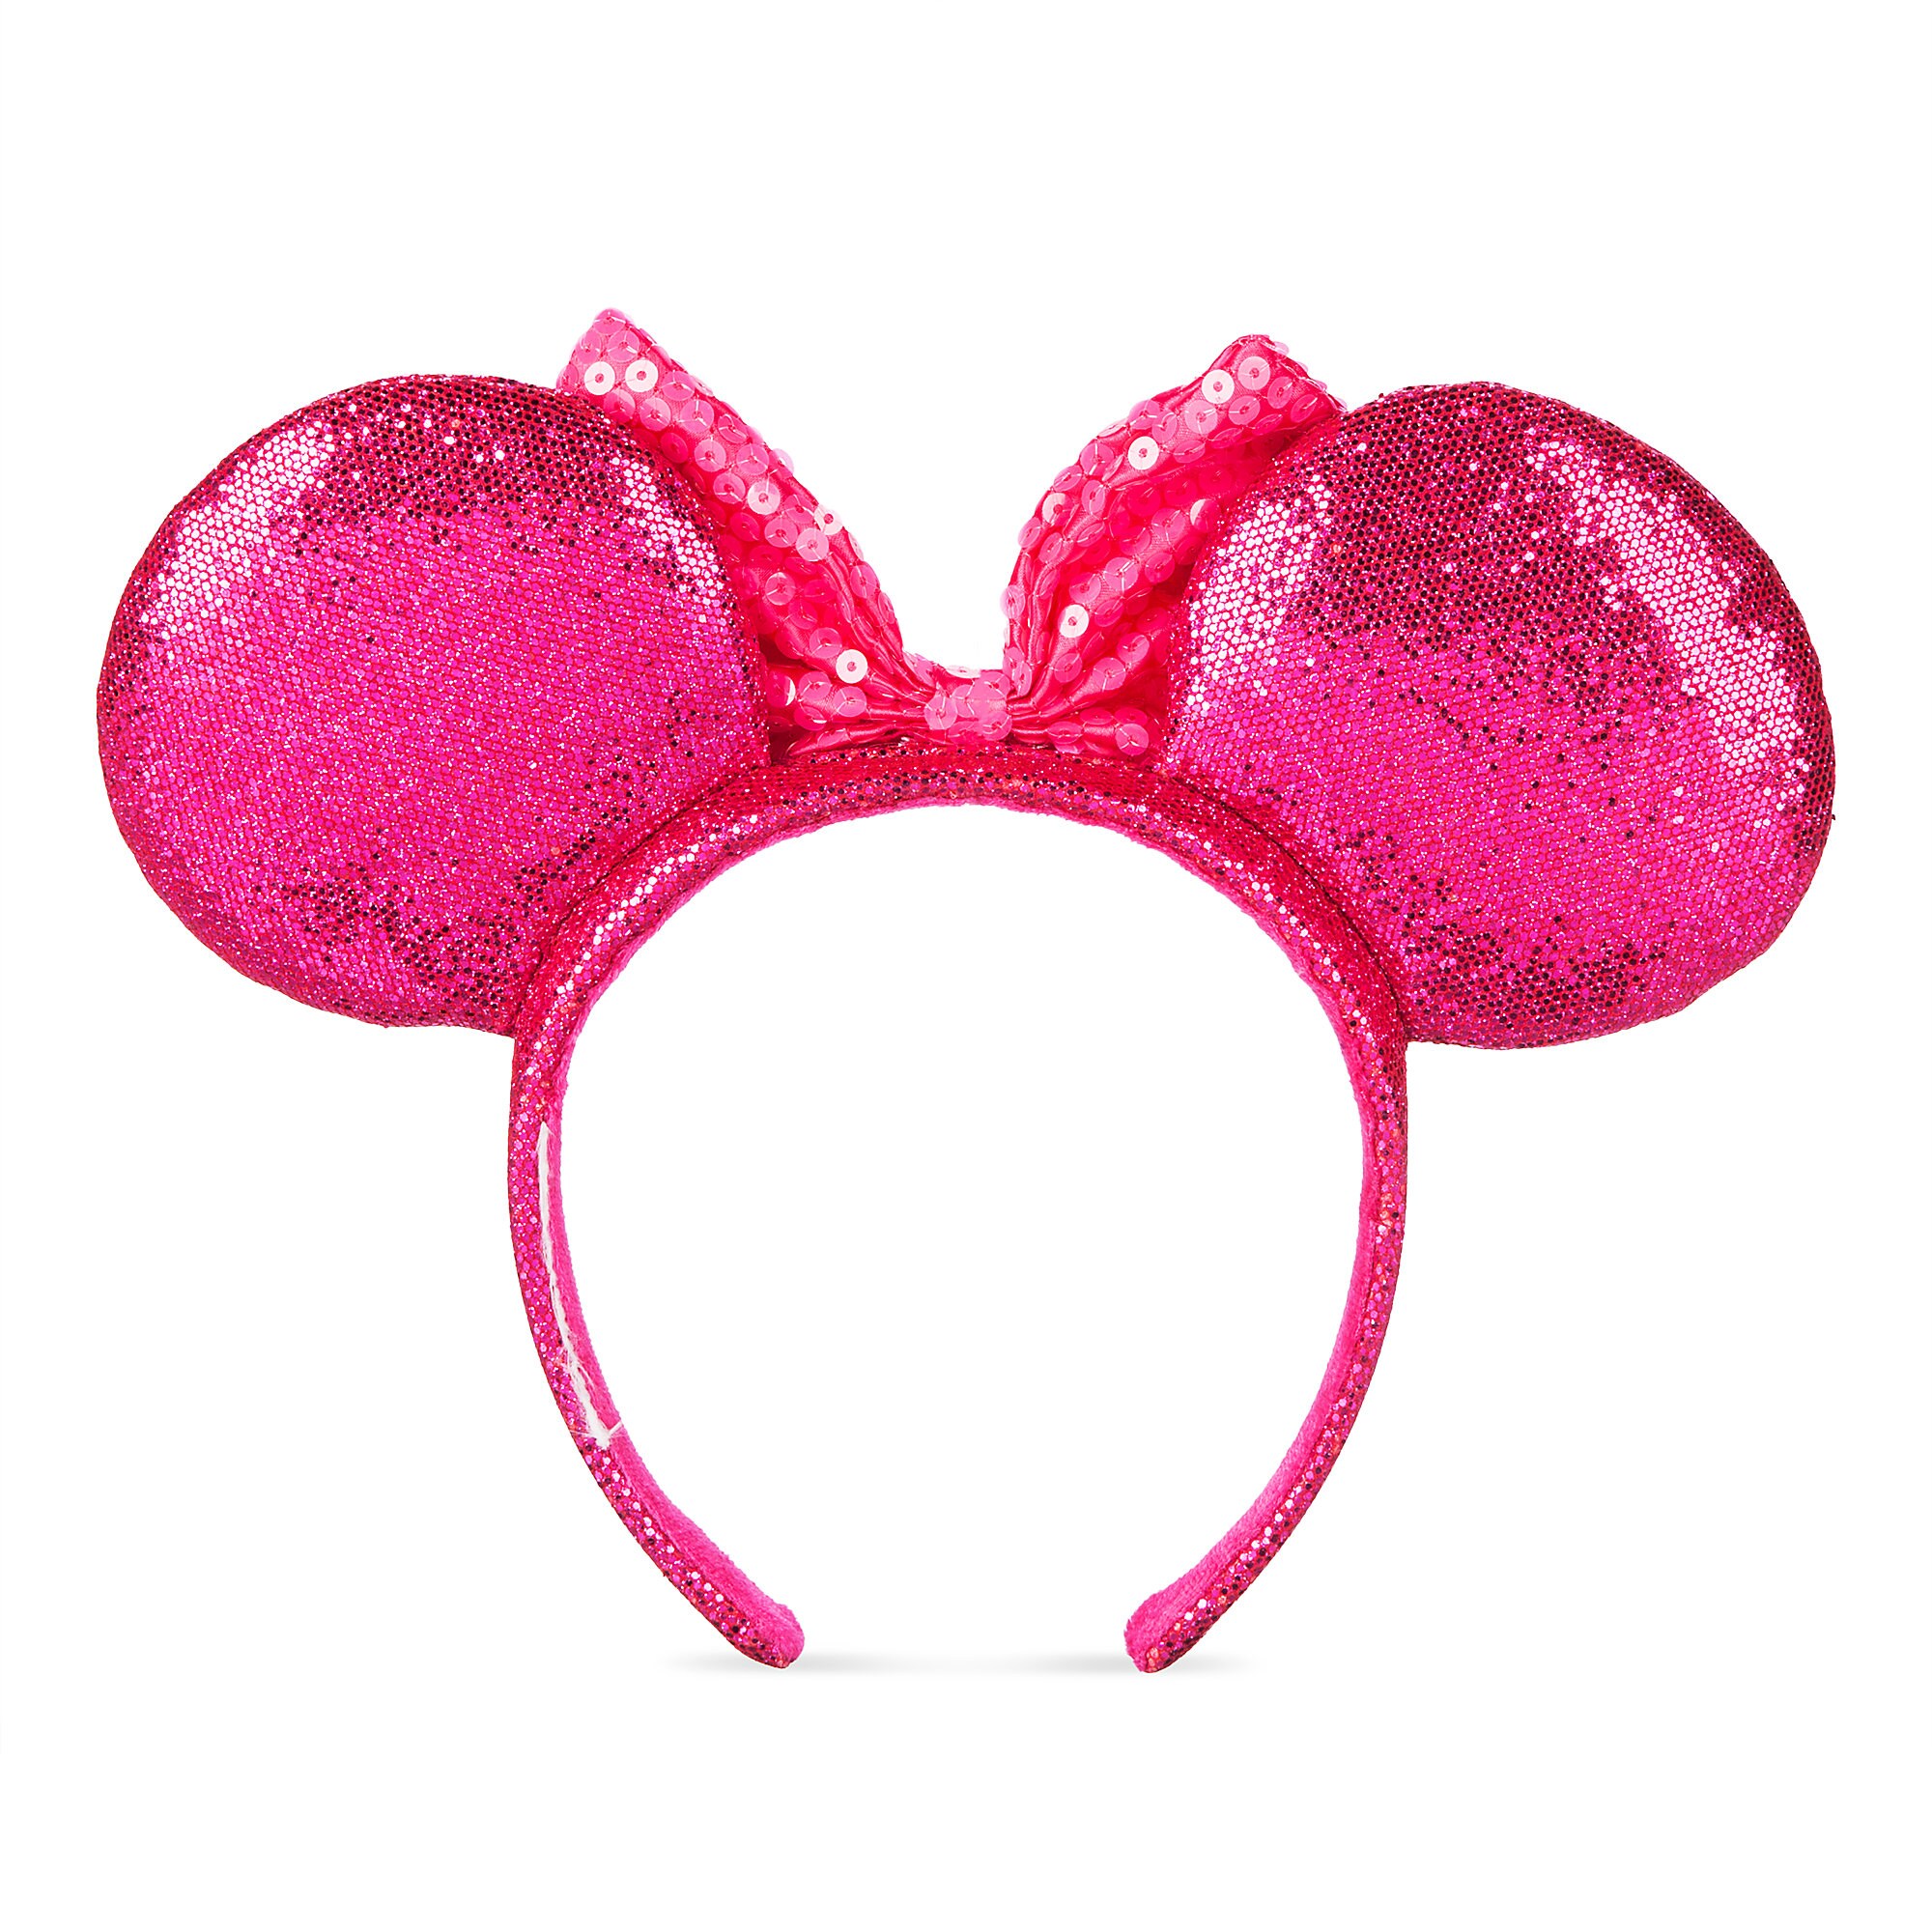 Minnie Mouse Glitter and Sequin Ear Headband - Imagination Pink